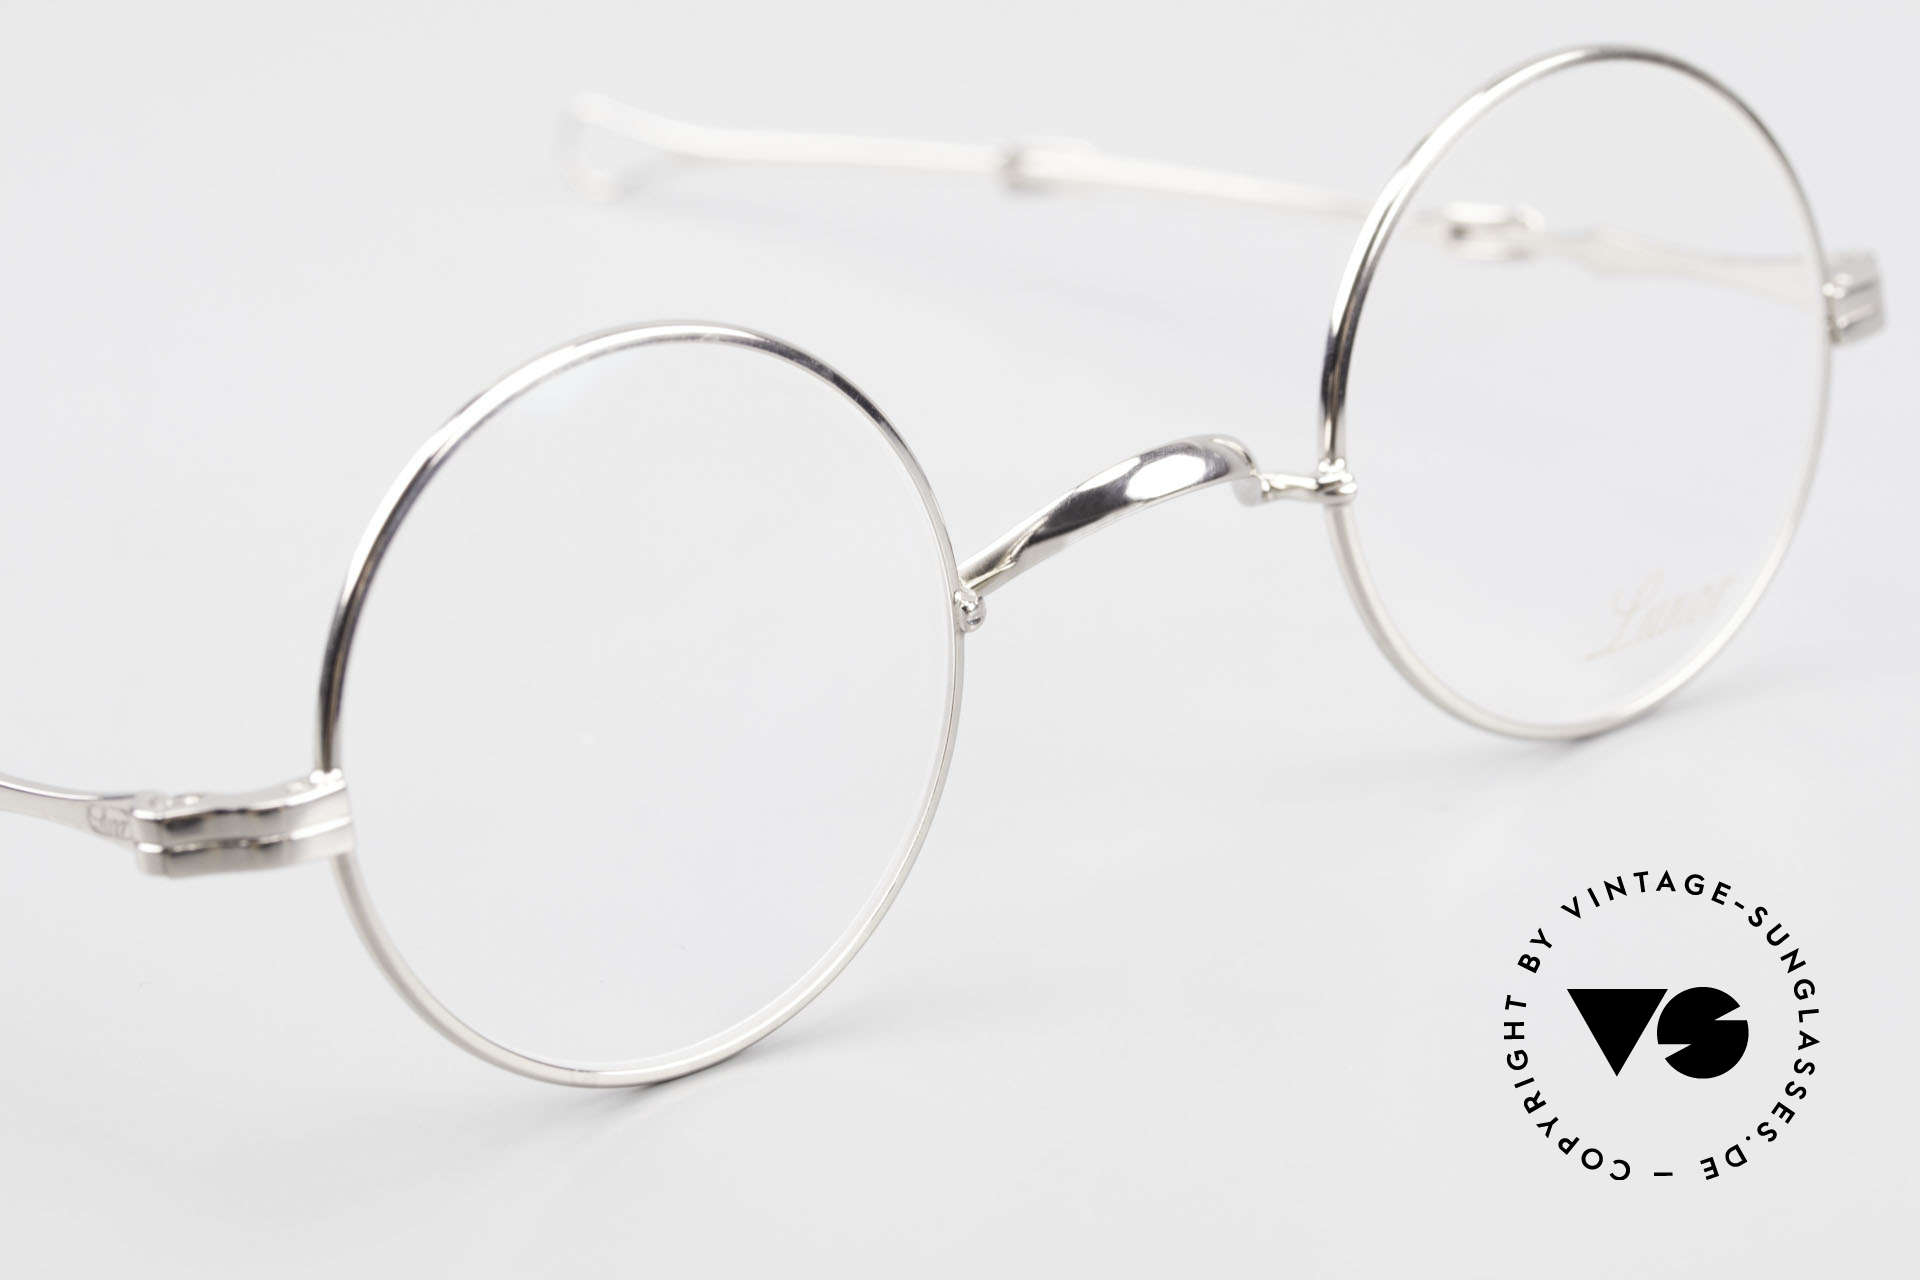 Lunor I 12 Telescopic Round Glasses Slide Temples, unworn RARITY (for all lovers of quality) from app. 1999, Made for Men and Women